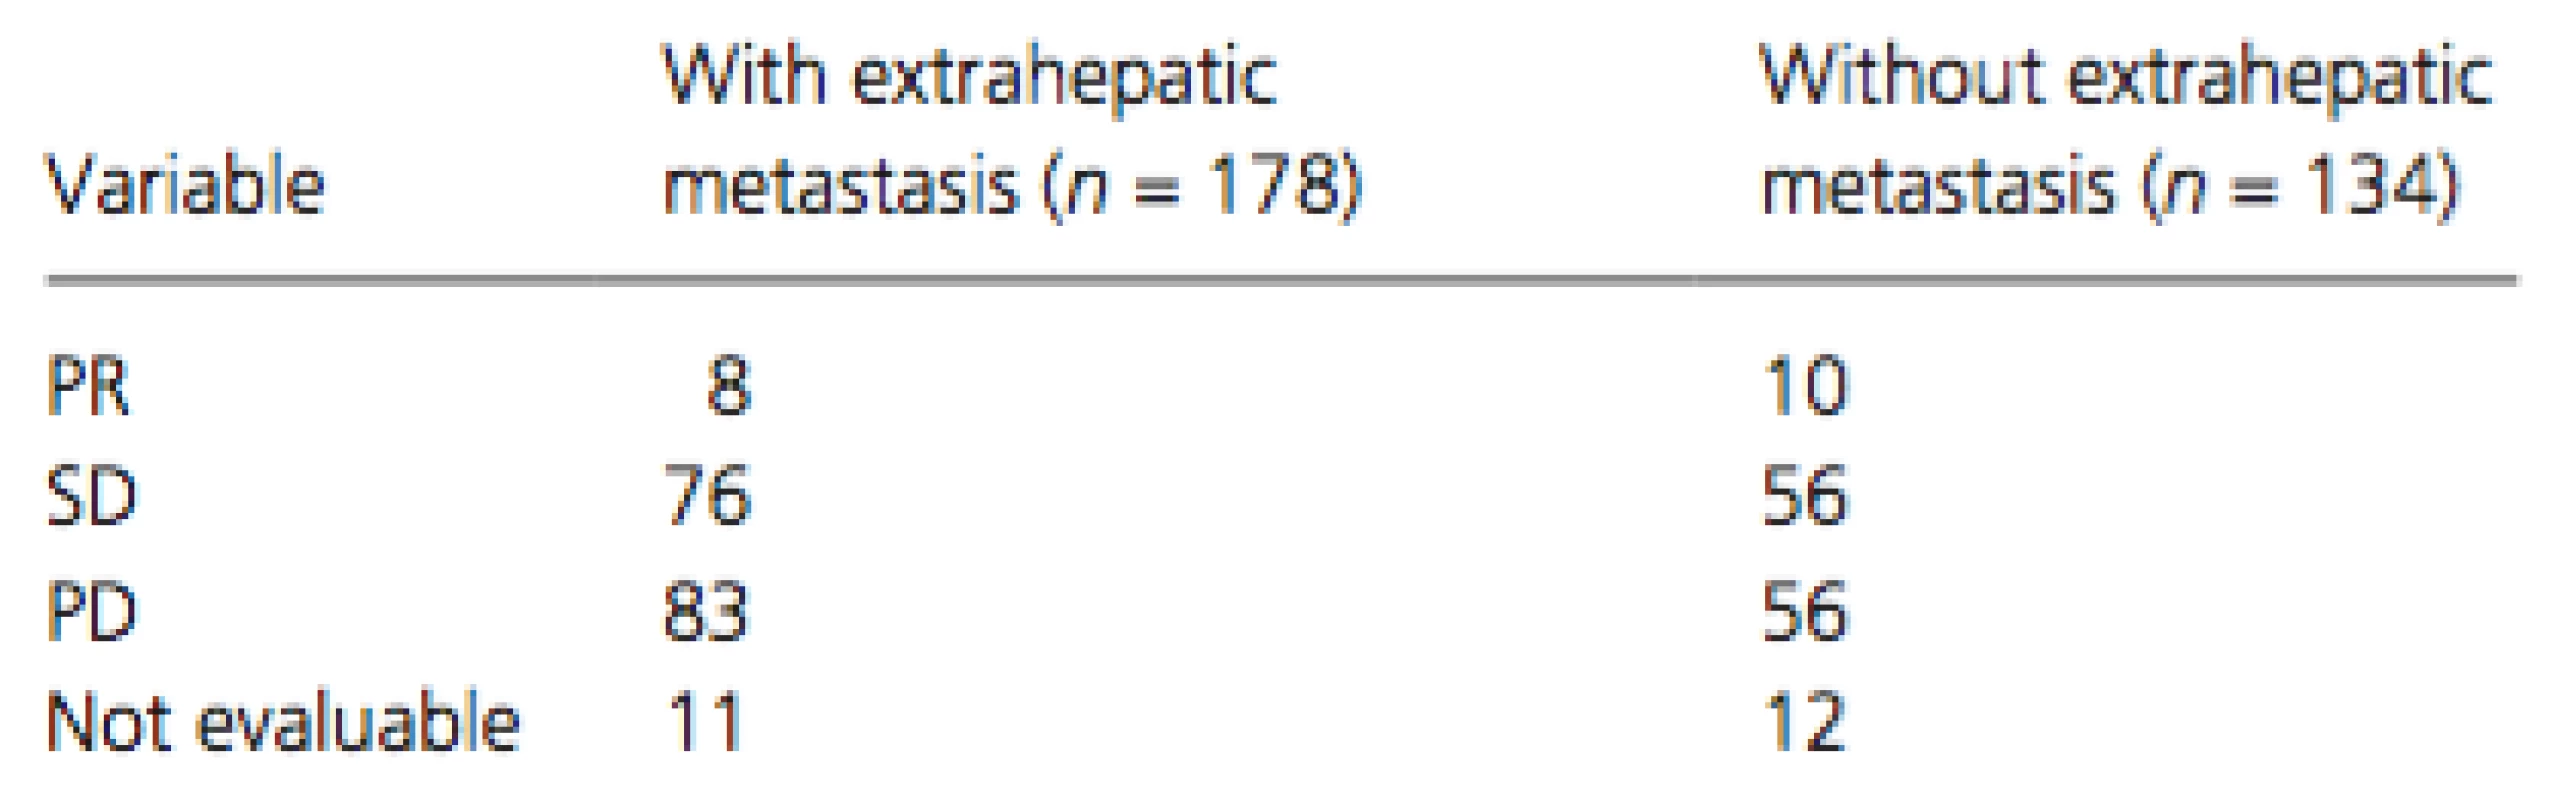 Therapeutic effects in patients with and without extrahepatic metastasis; P = 0.3061 (via chi-square test)